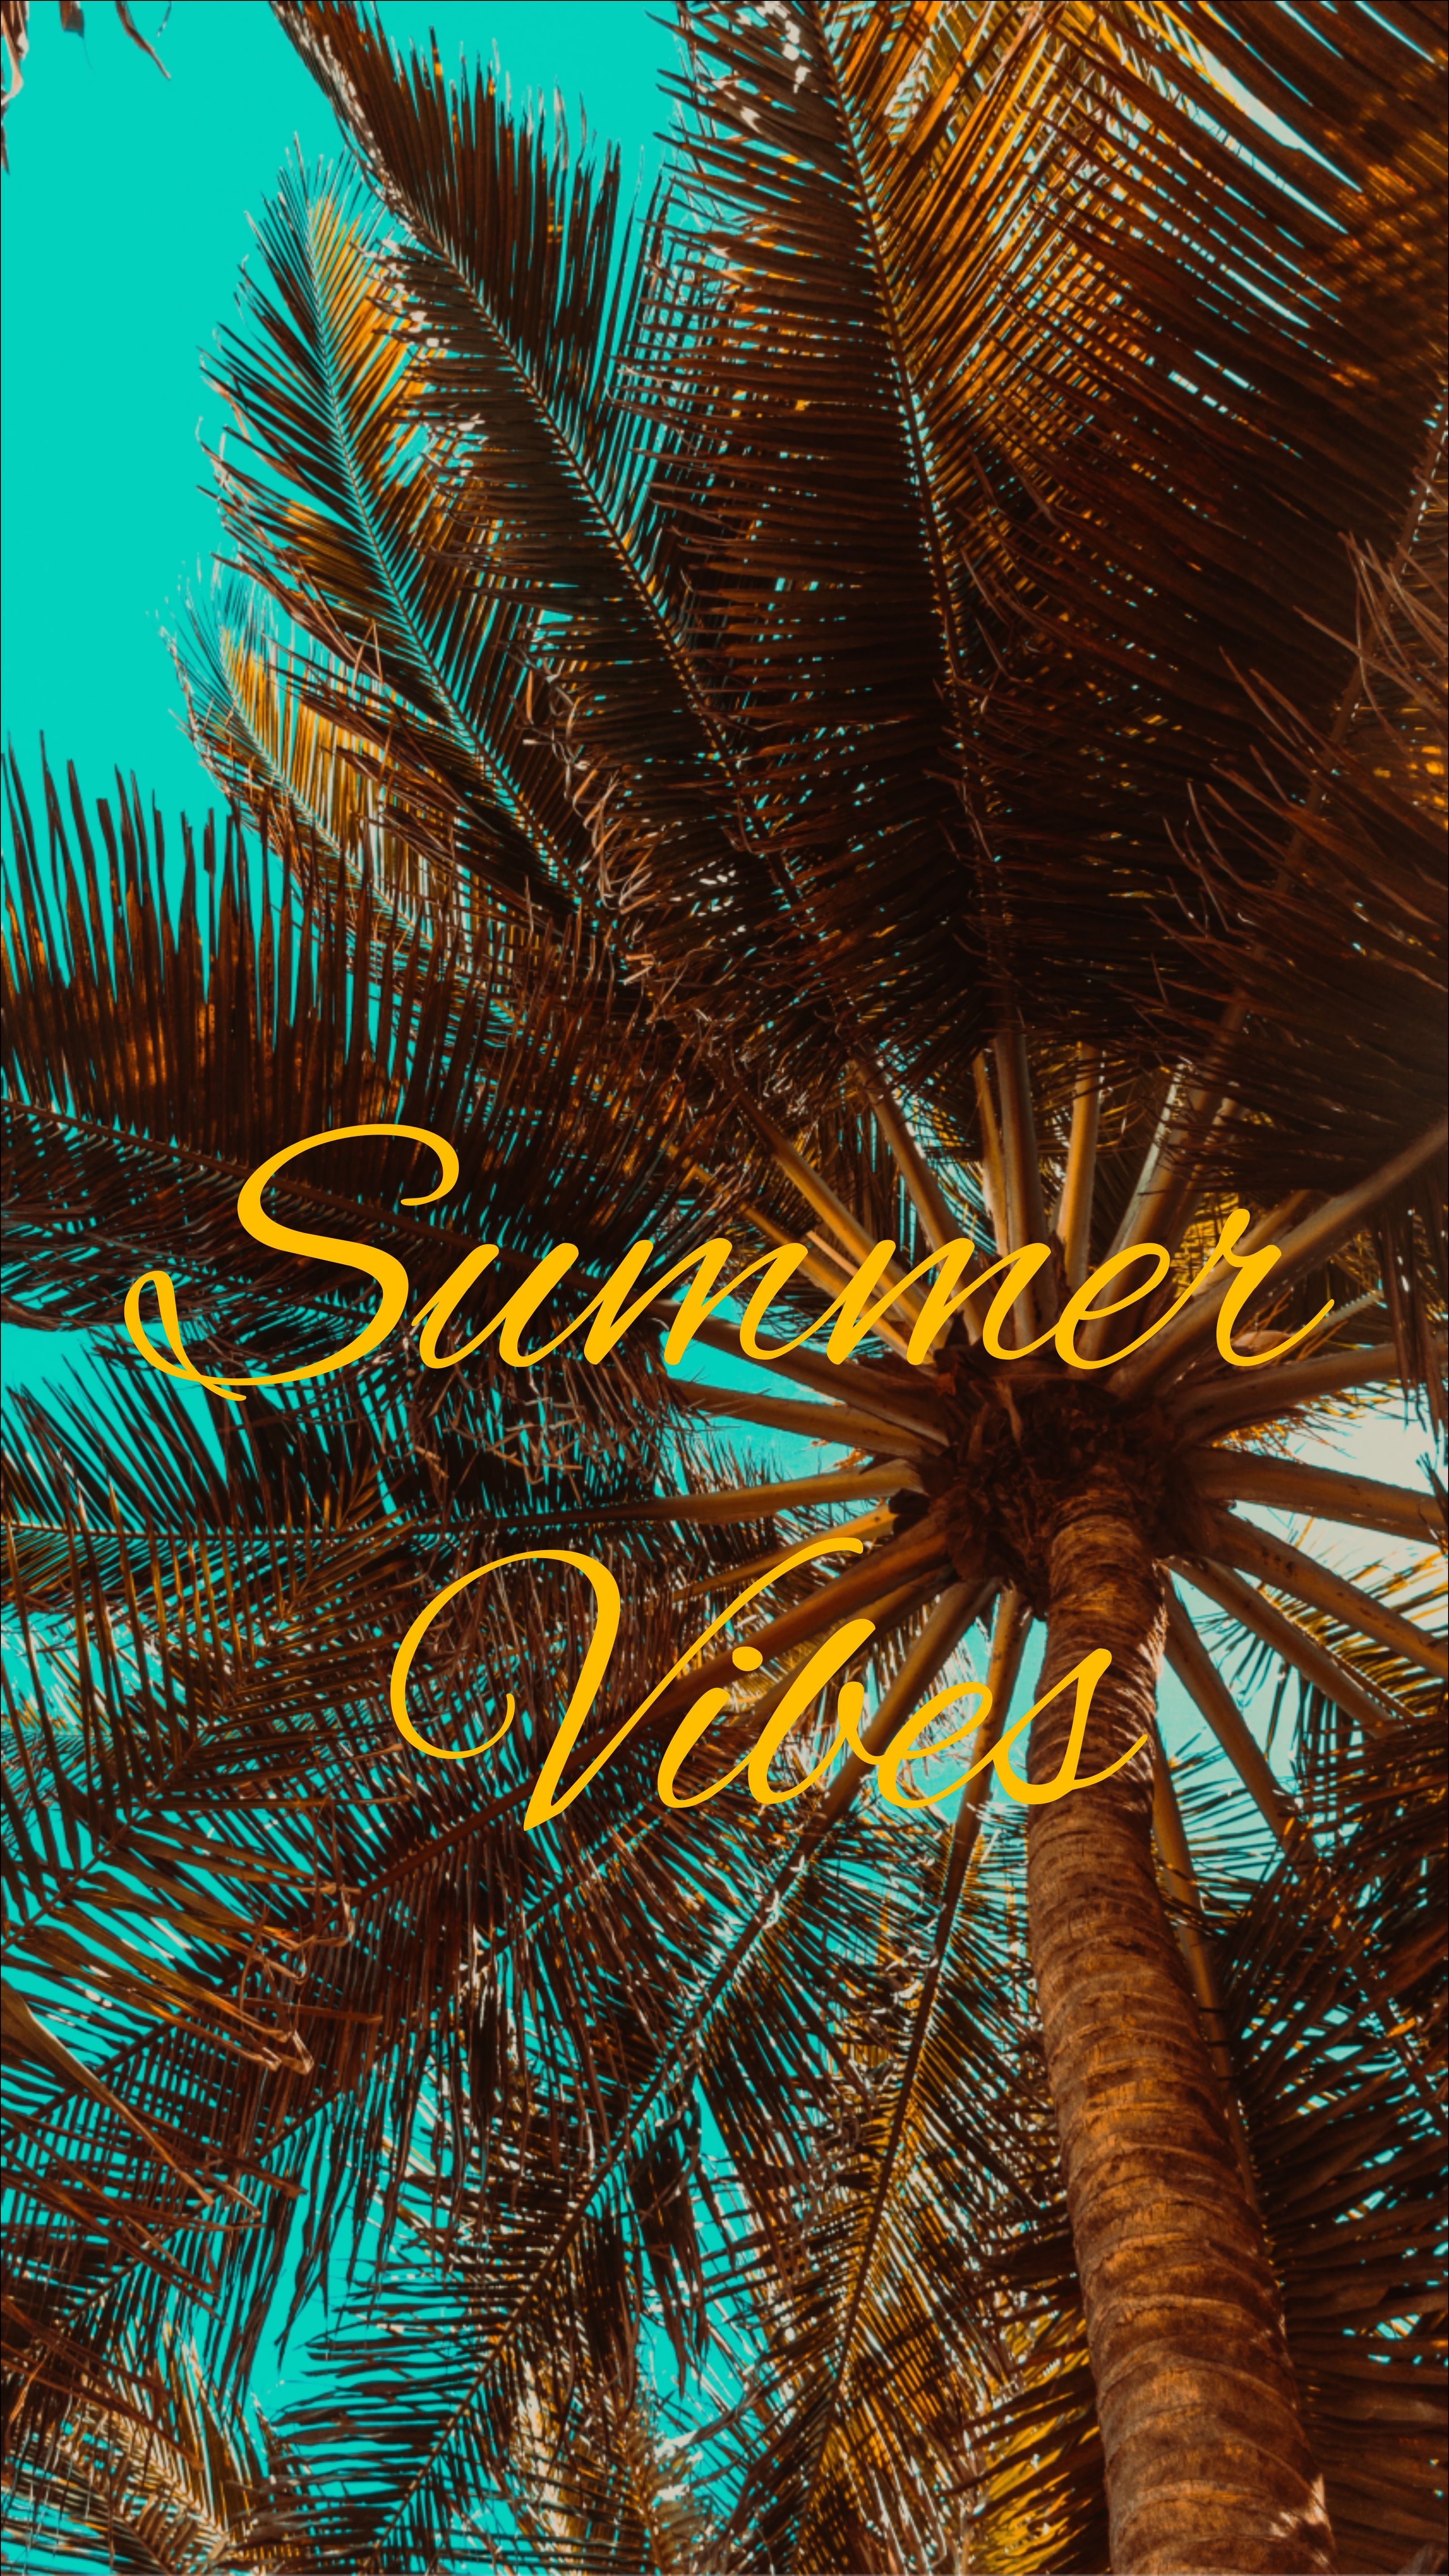 13190 Aesthetic Vibes Images Stock Photos  Vectors  Shutterstock